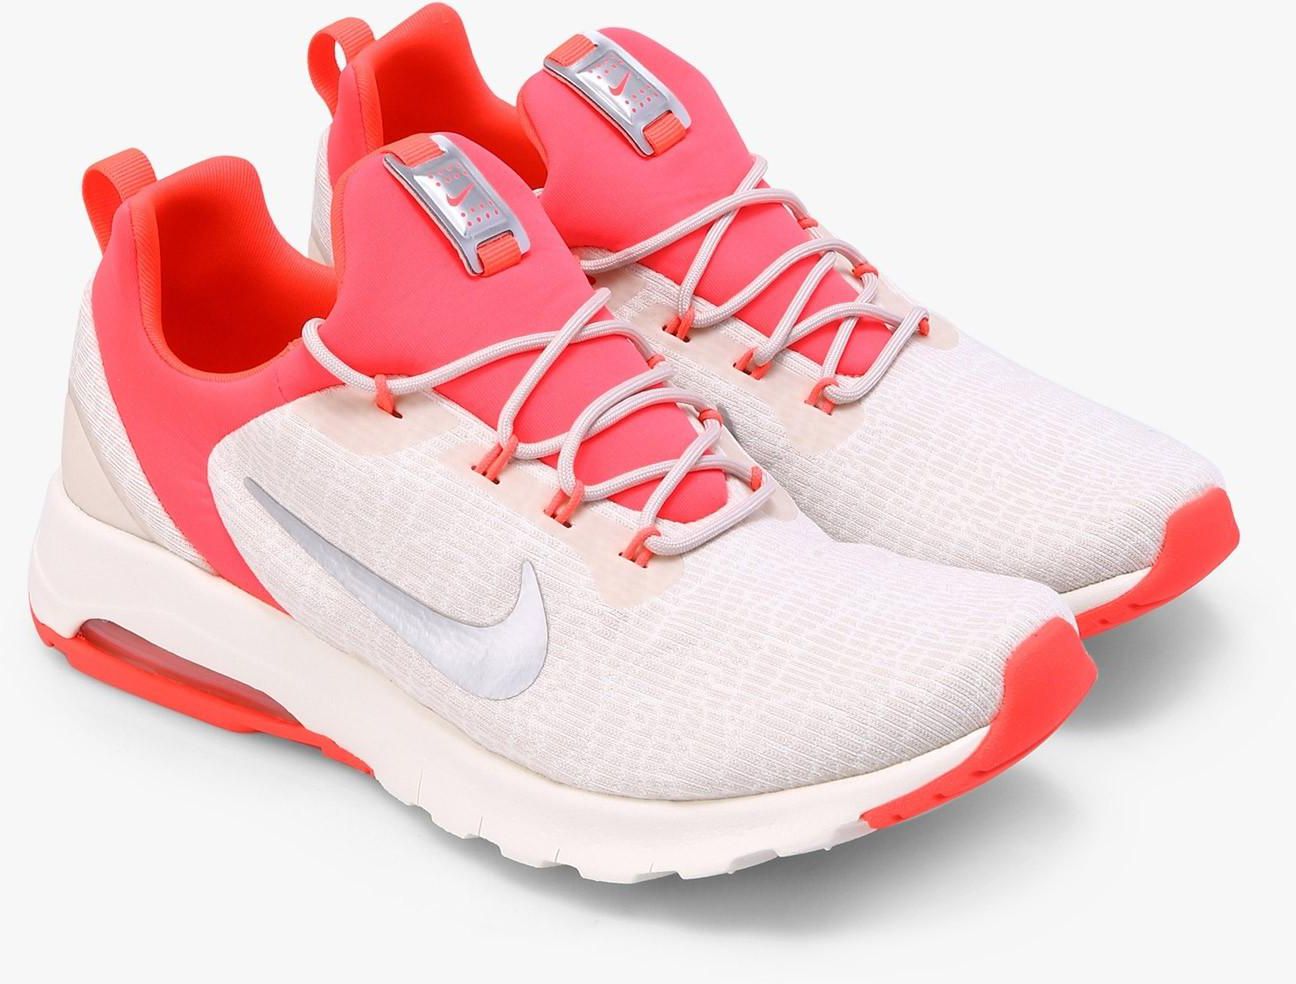 Off-White and Neon Pink Air Max Motion Racer Women Shoes